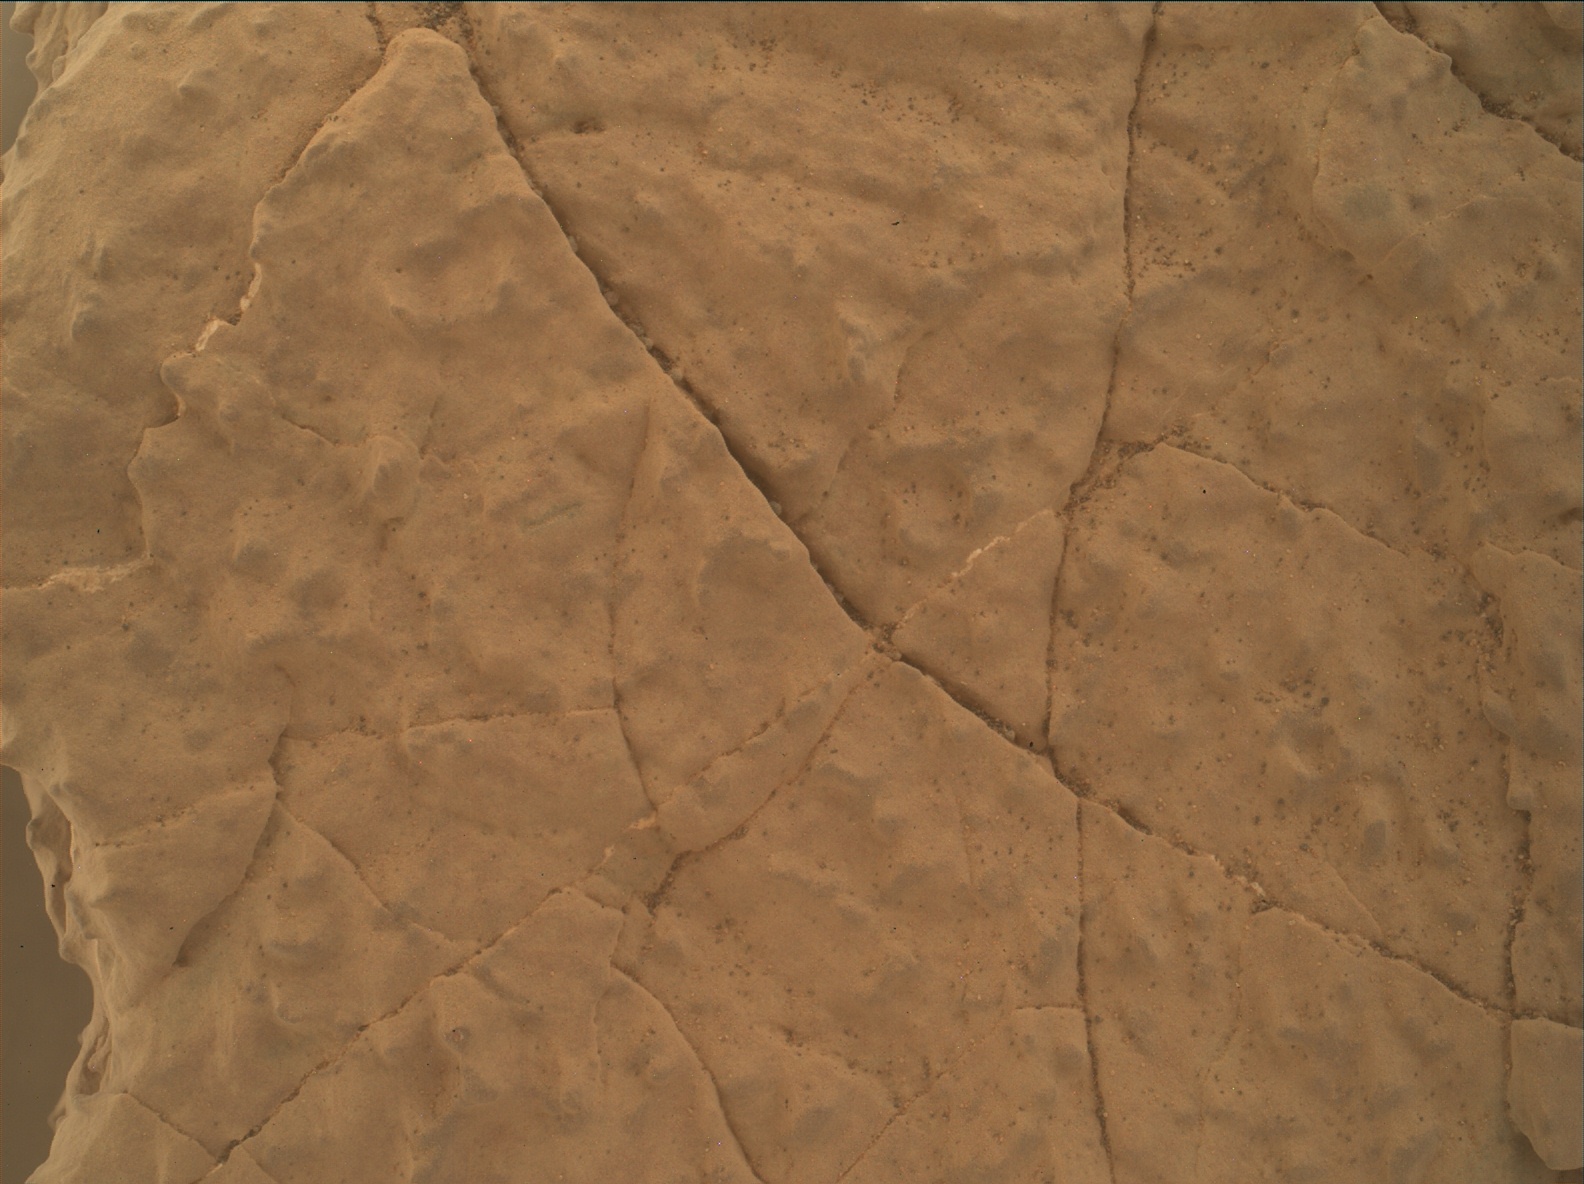 Nasa's Mars rover Curiosity acquired this image using its Mars Hand Lens Imager (MAHLI) on Sol 3025